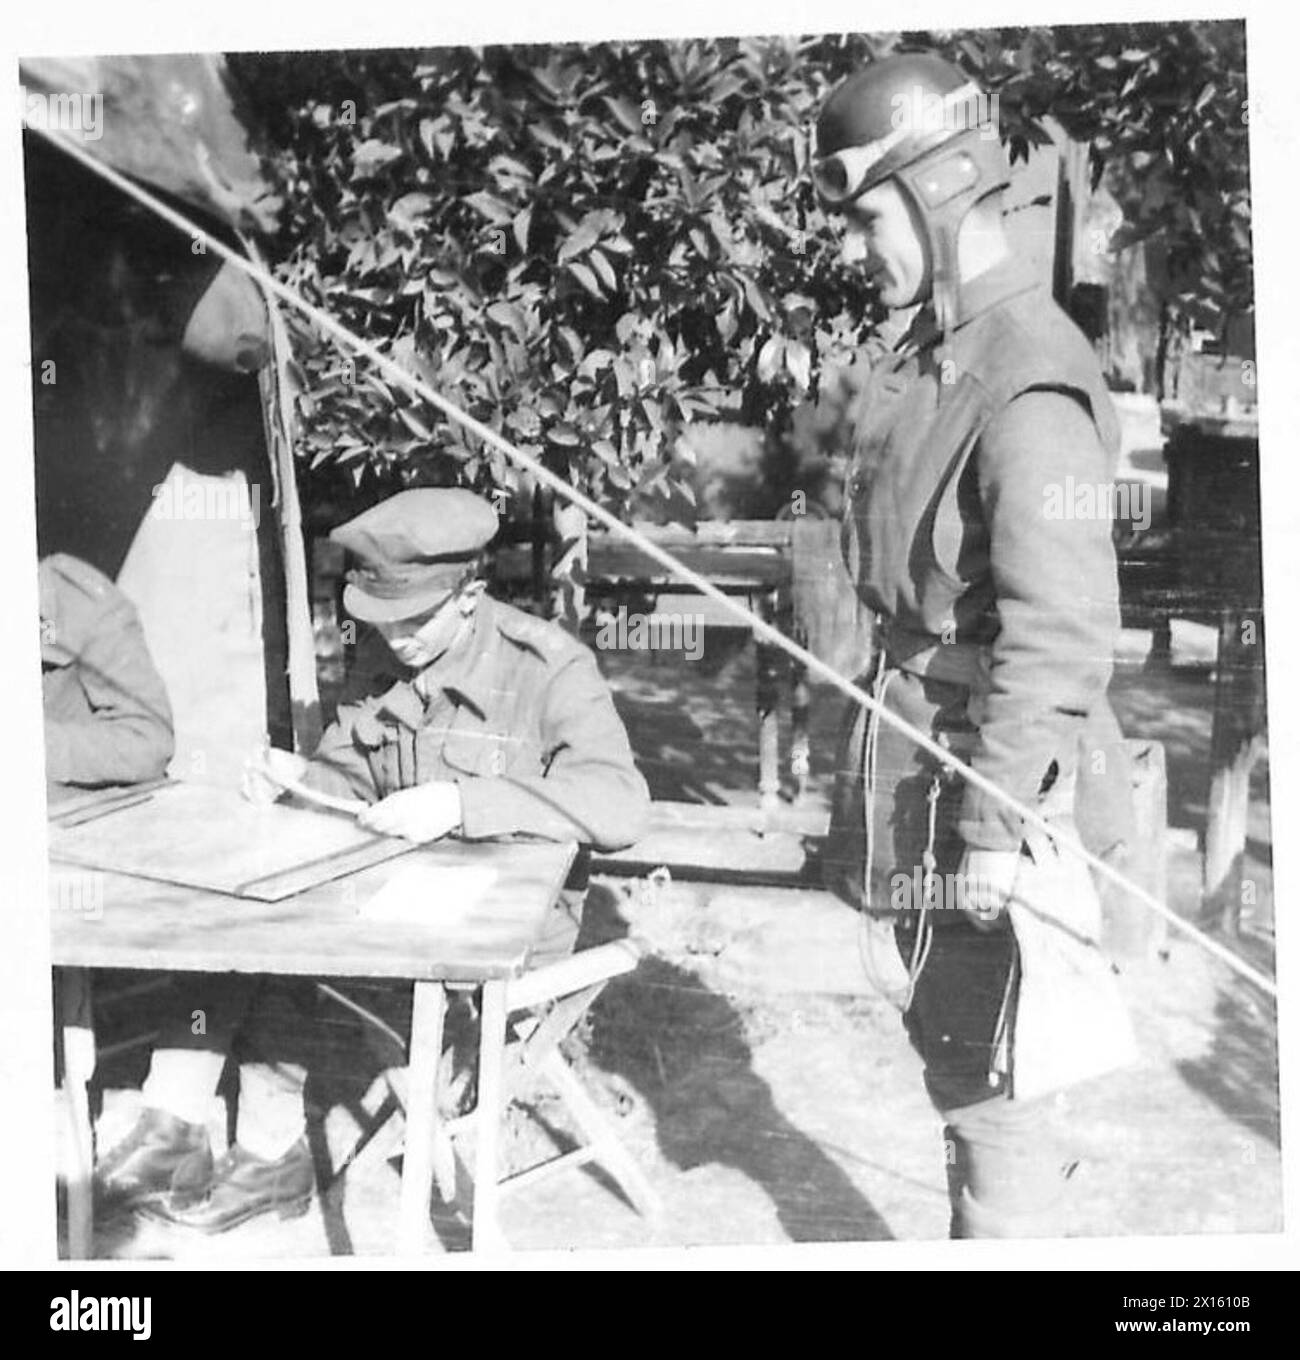 ITALY : FIFTH ARMYARTILLERY SURVEY IN ACTION - D.R. Gnr. T. Grant arrives from HQ with a message which he hands to Capt. Warner at the Survey Report Centre. It is a request to make a reconnaissance survey of a new gun area for the correct placing of the artillery moving in British Army Stock Photo